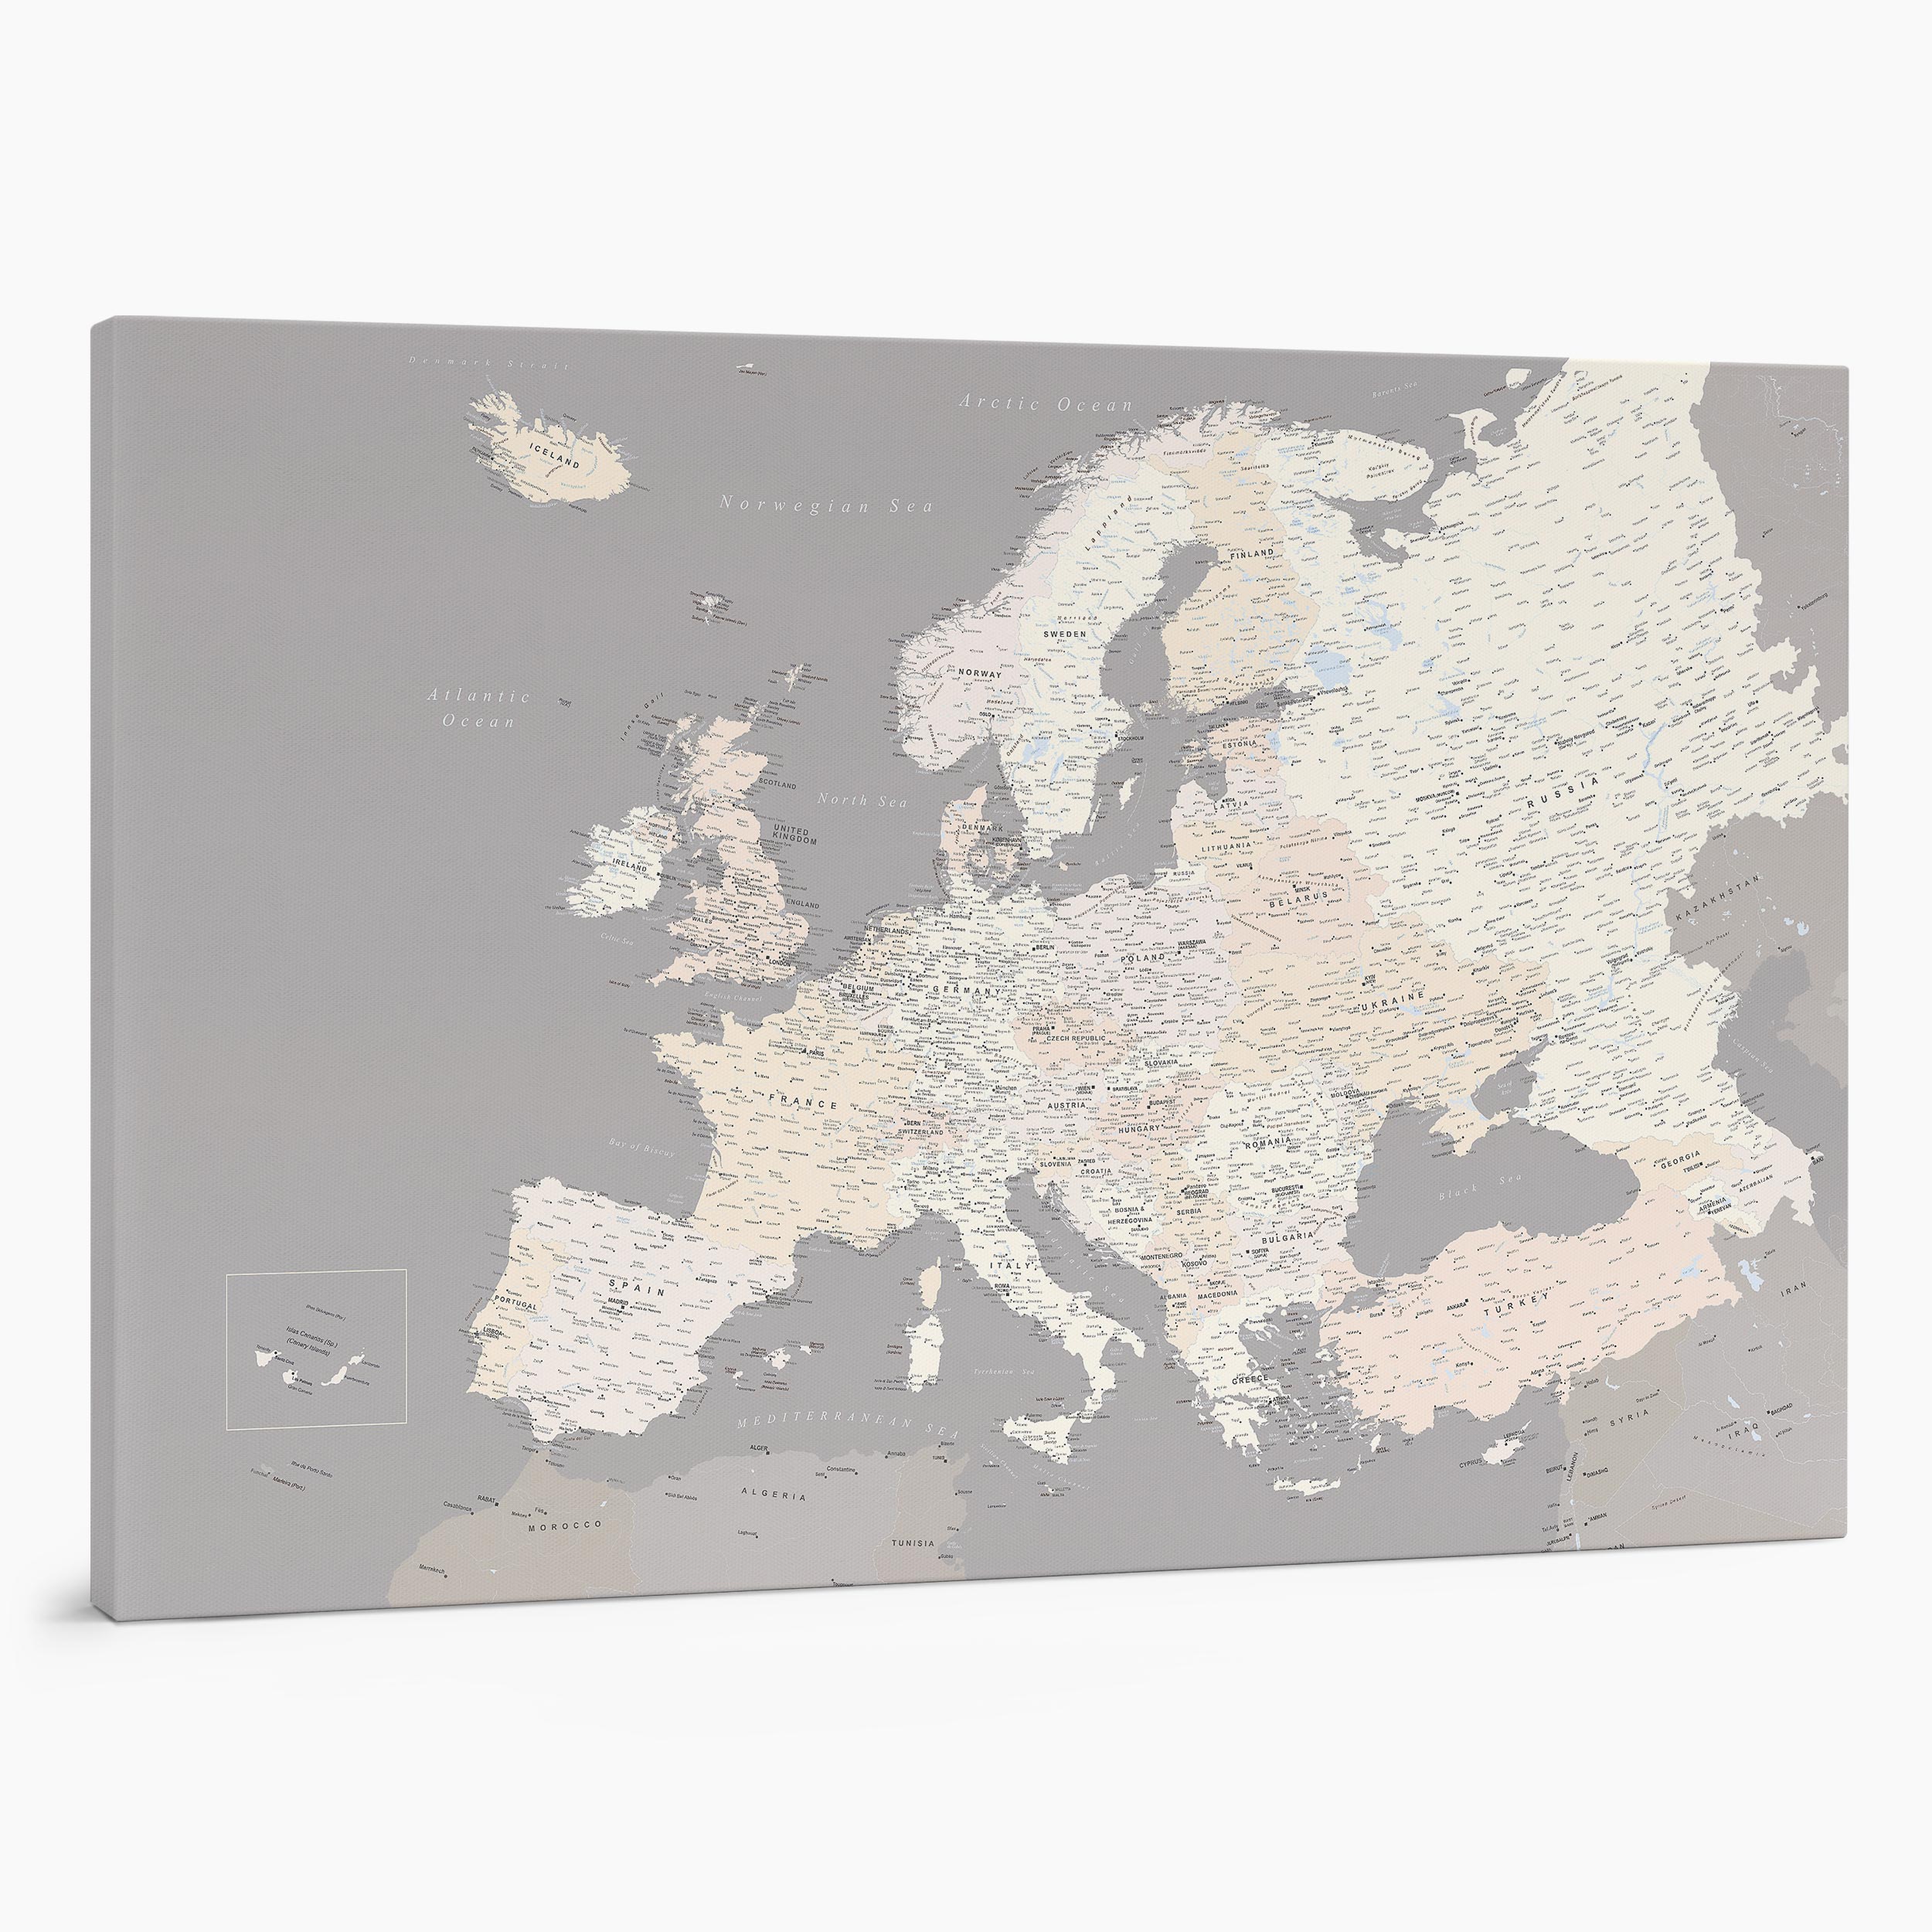 2EU large push pin europe map to track places visited on canvas grey cream